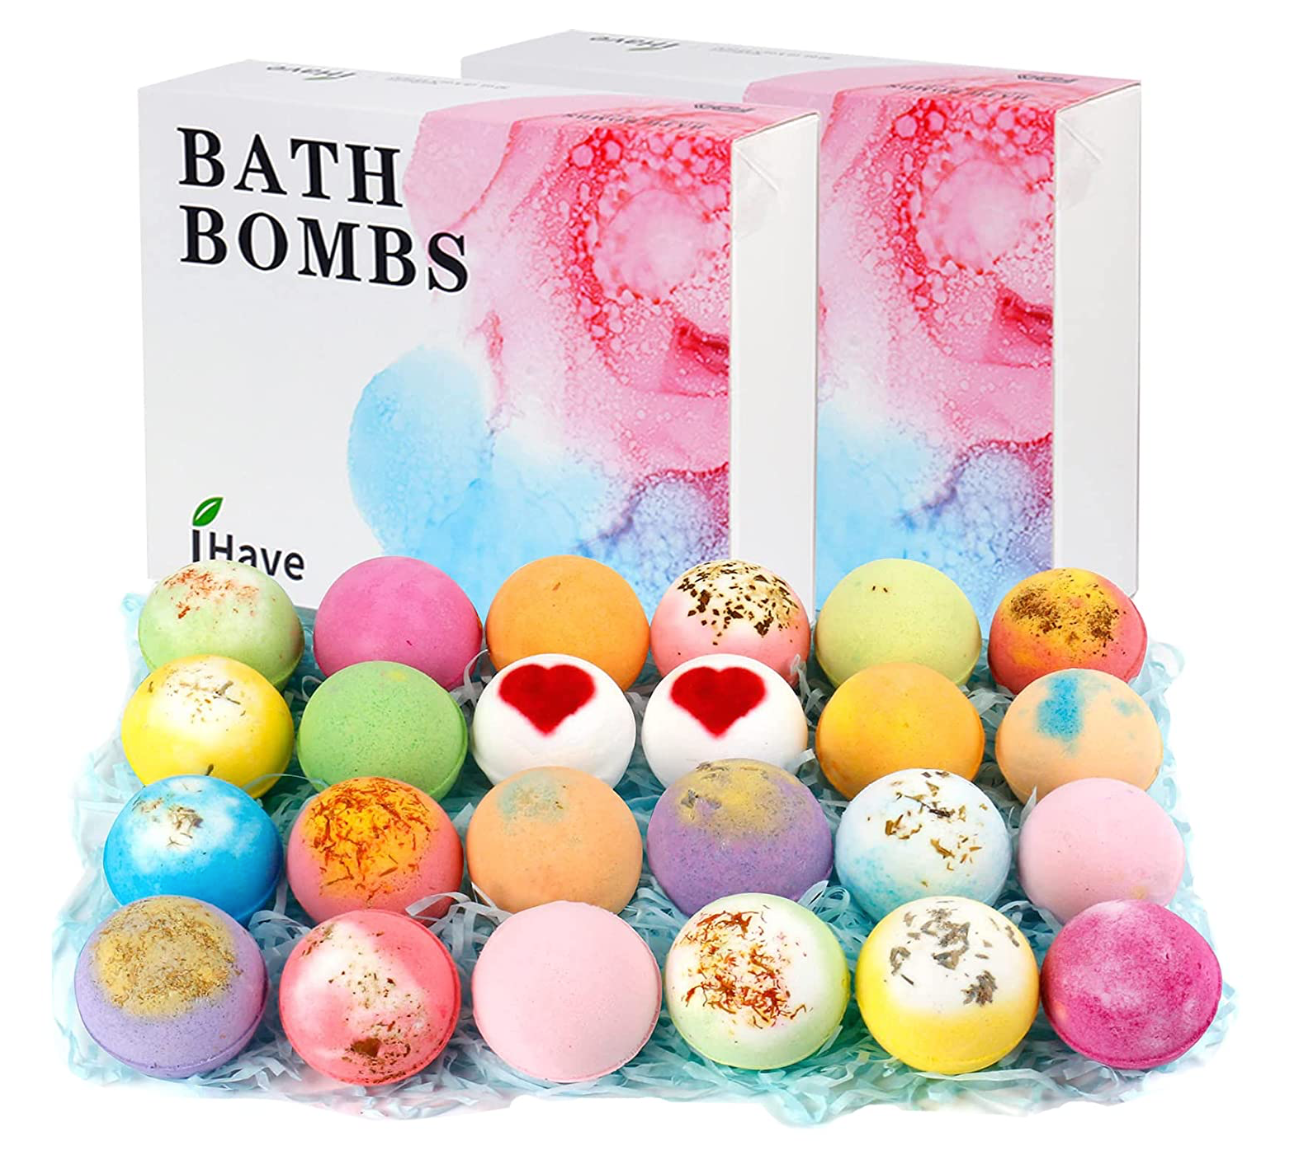 iHave Bath Bombs for Women, 12 Small Bath Bomb Bubble Bath Set Spa Gifts for Women, Natural Handmade Bath Bombs Rich in Essential Oils, Romantic Gifts for Her Multicolor